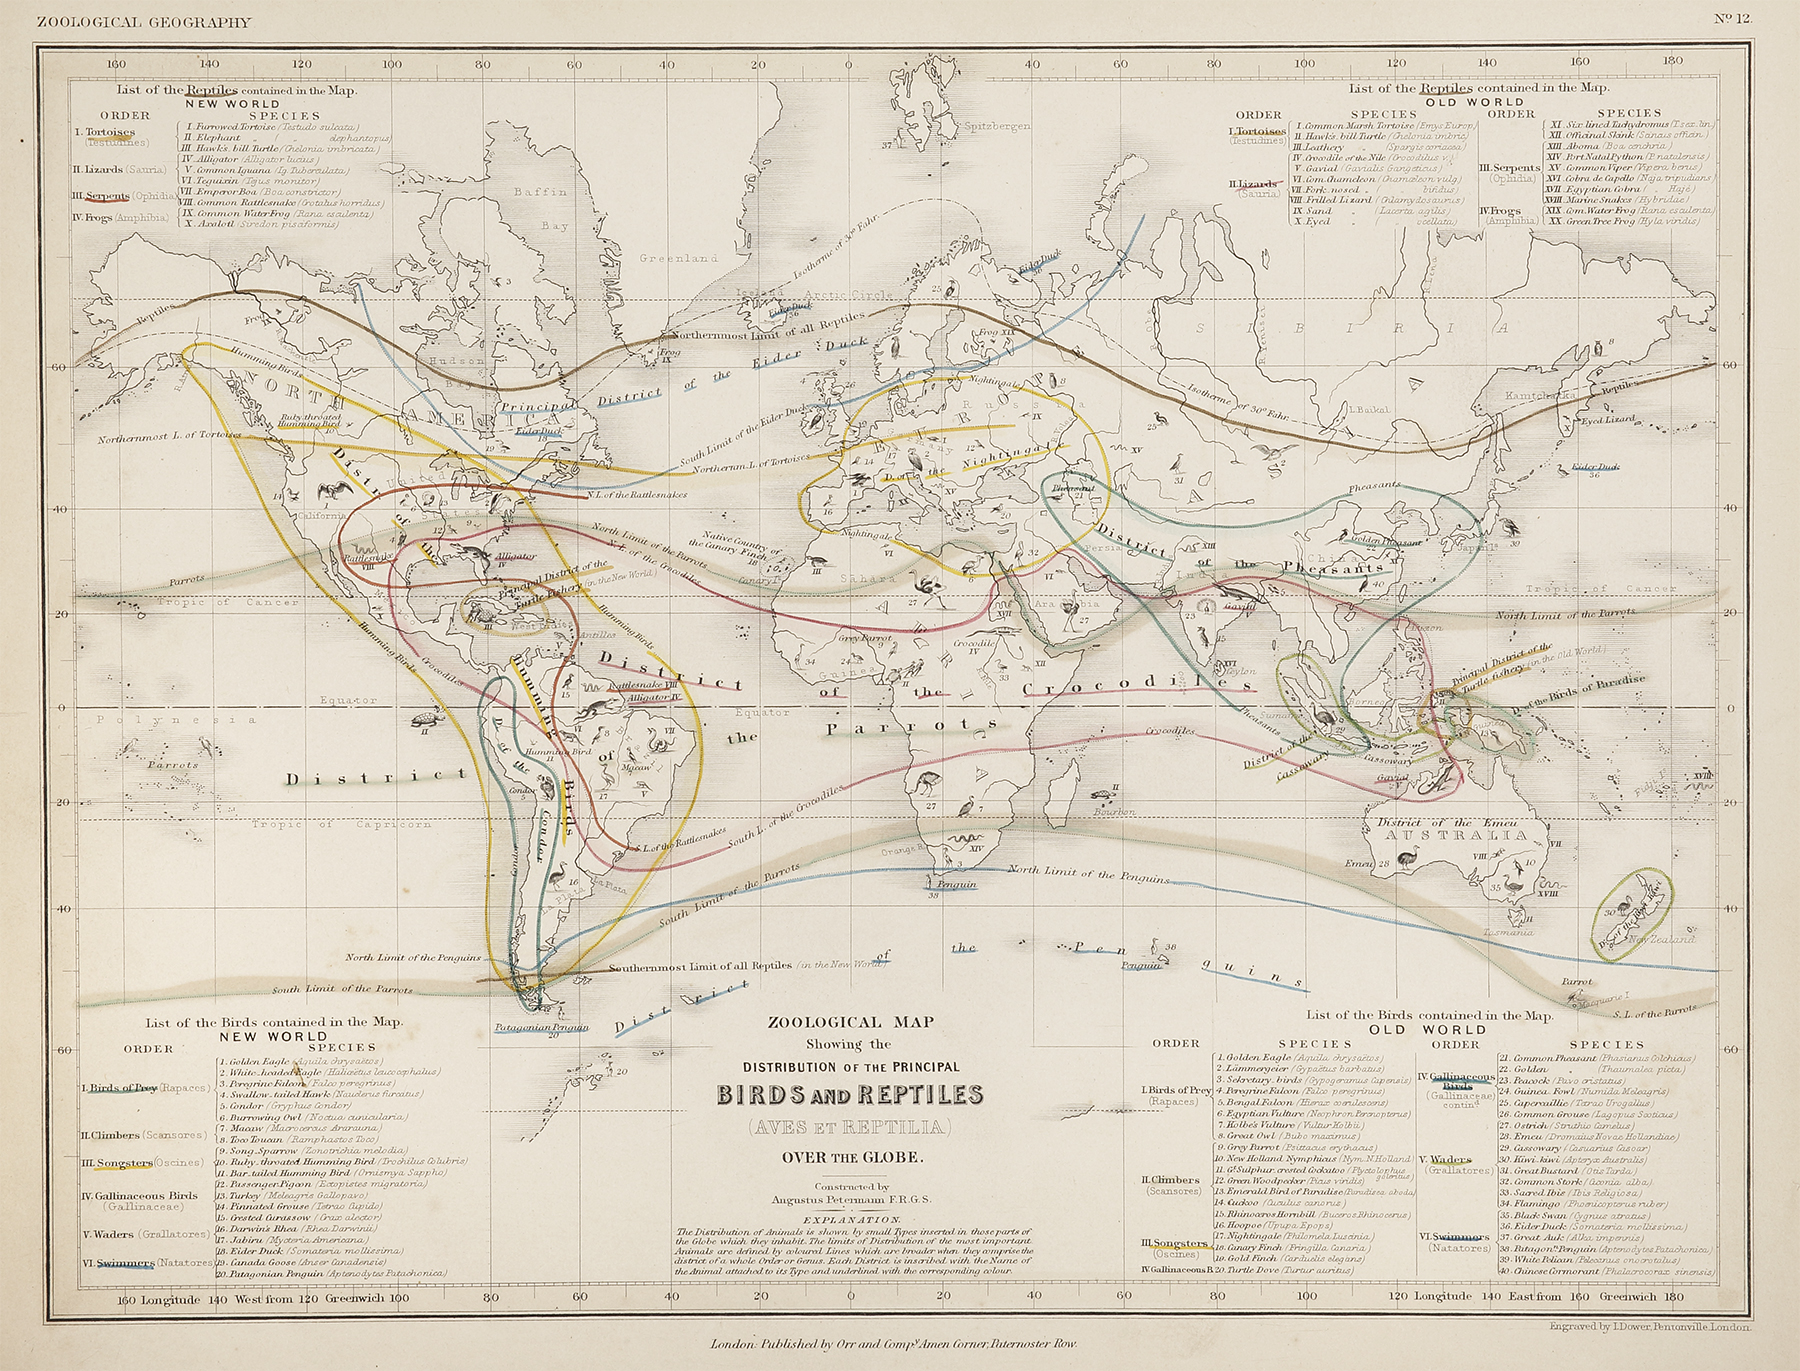 Zoological Map Showing the Distribution of the Principal Birds and Reptiles (Aves et Reptilia) Over the Globe. - Antique Map from 1850